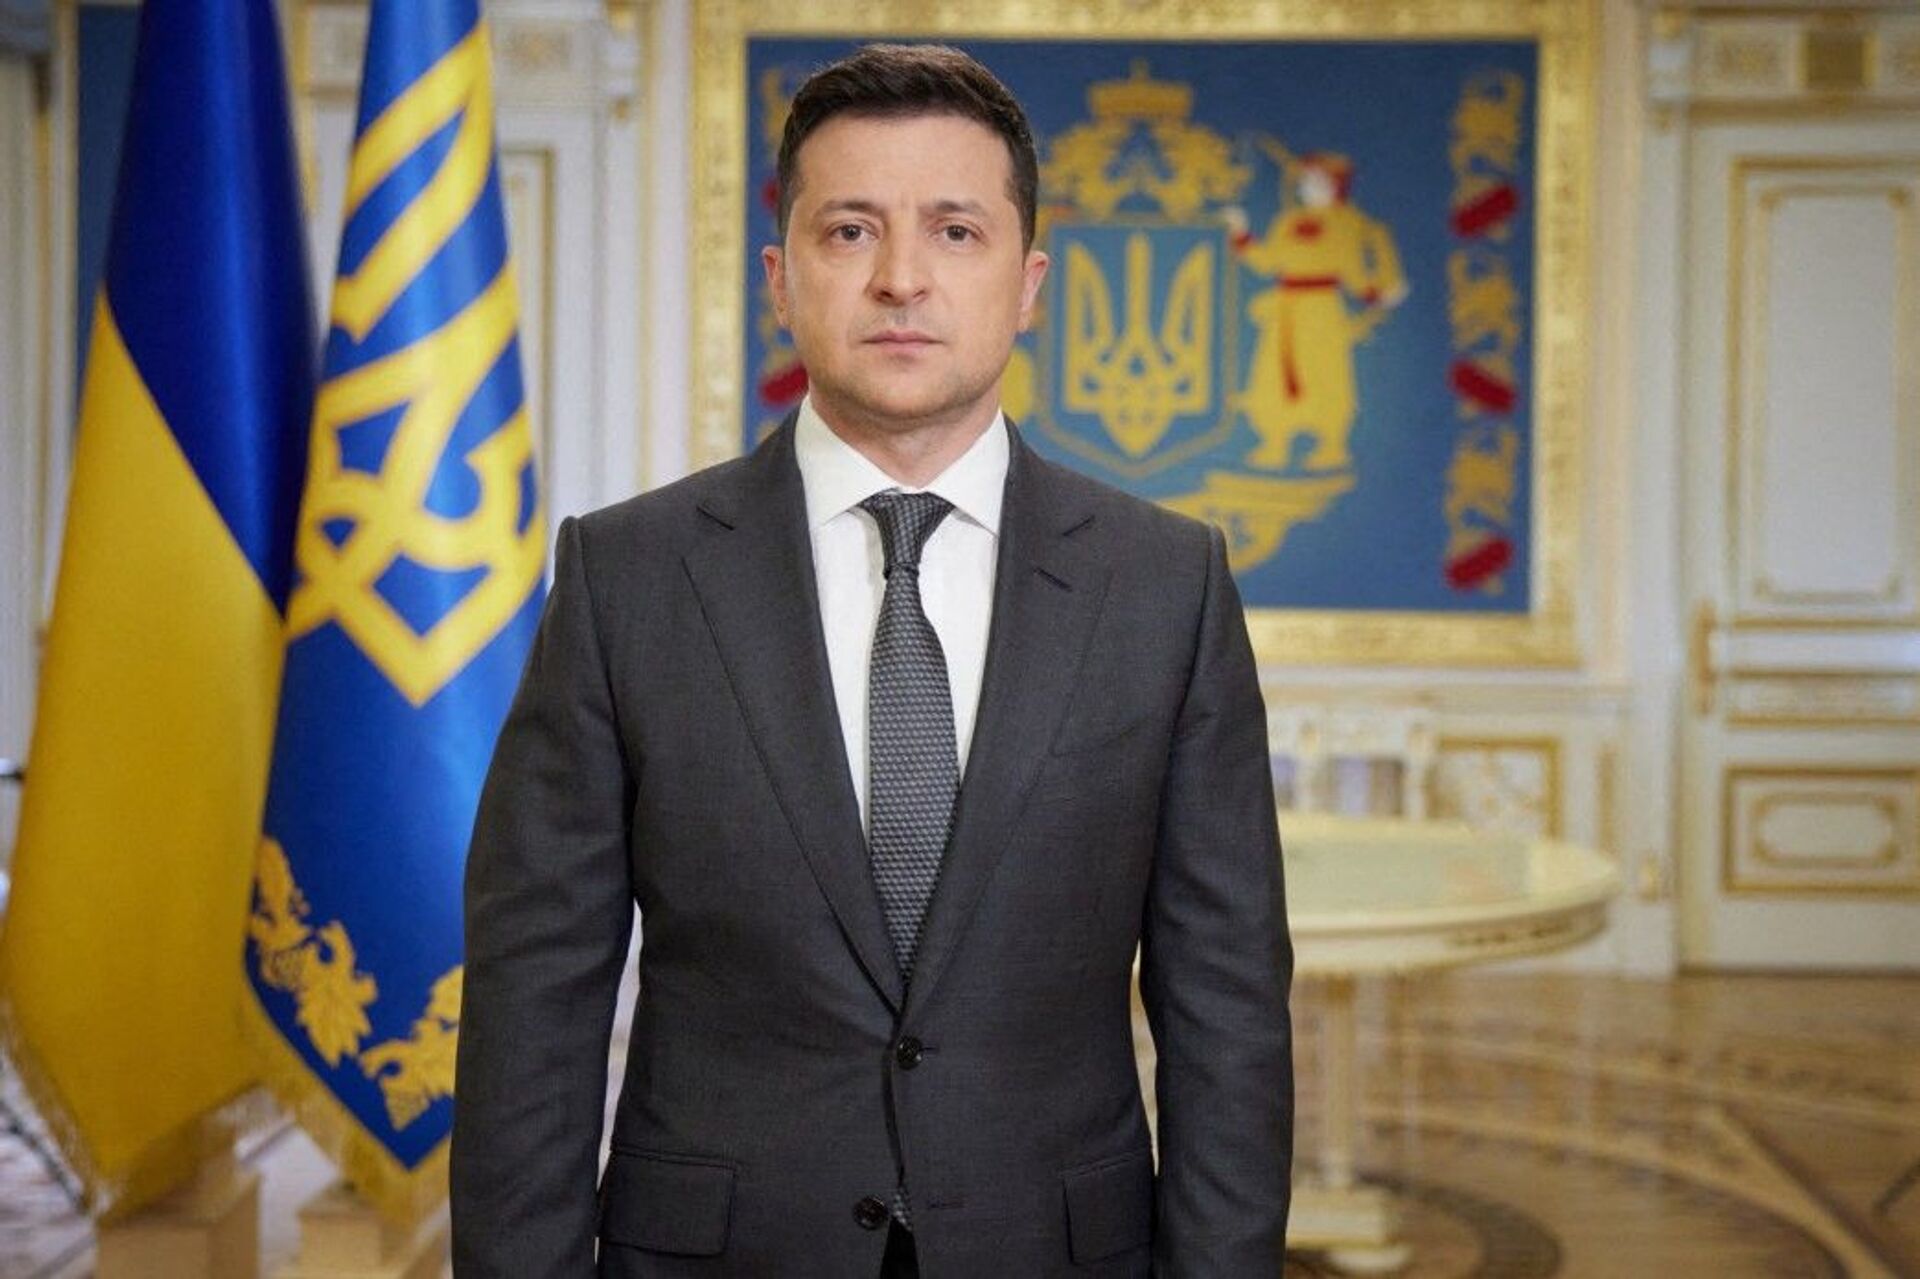 This handout photograph taken and released by The Ukrainian Presidential Press Service on April 20, 2021, shows Ukranian President Volodymyr Zelensky speaking during his late evening address in Kiev.  - Sputnik International, 1920, 16.03.2022